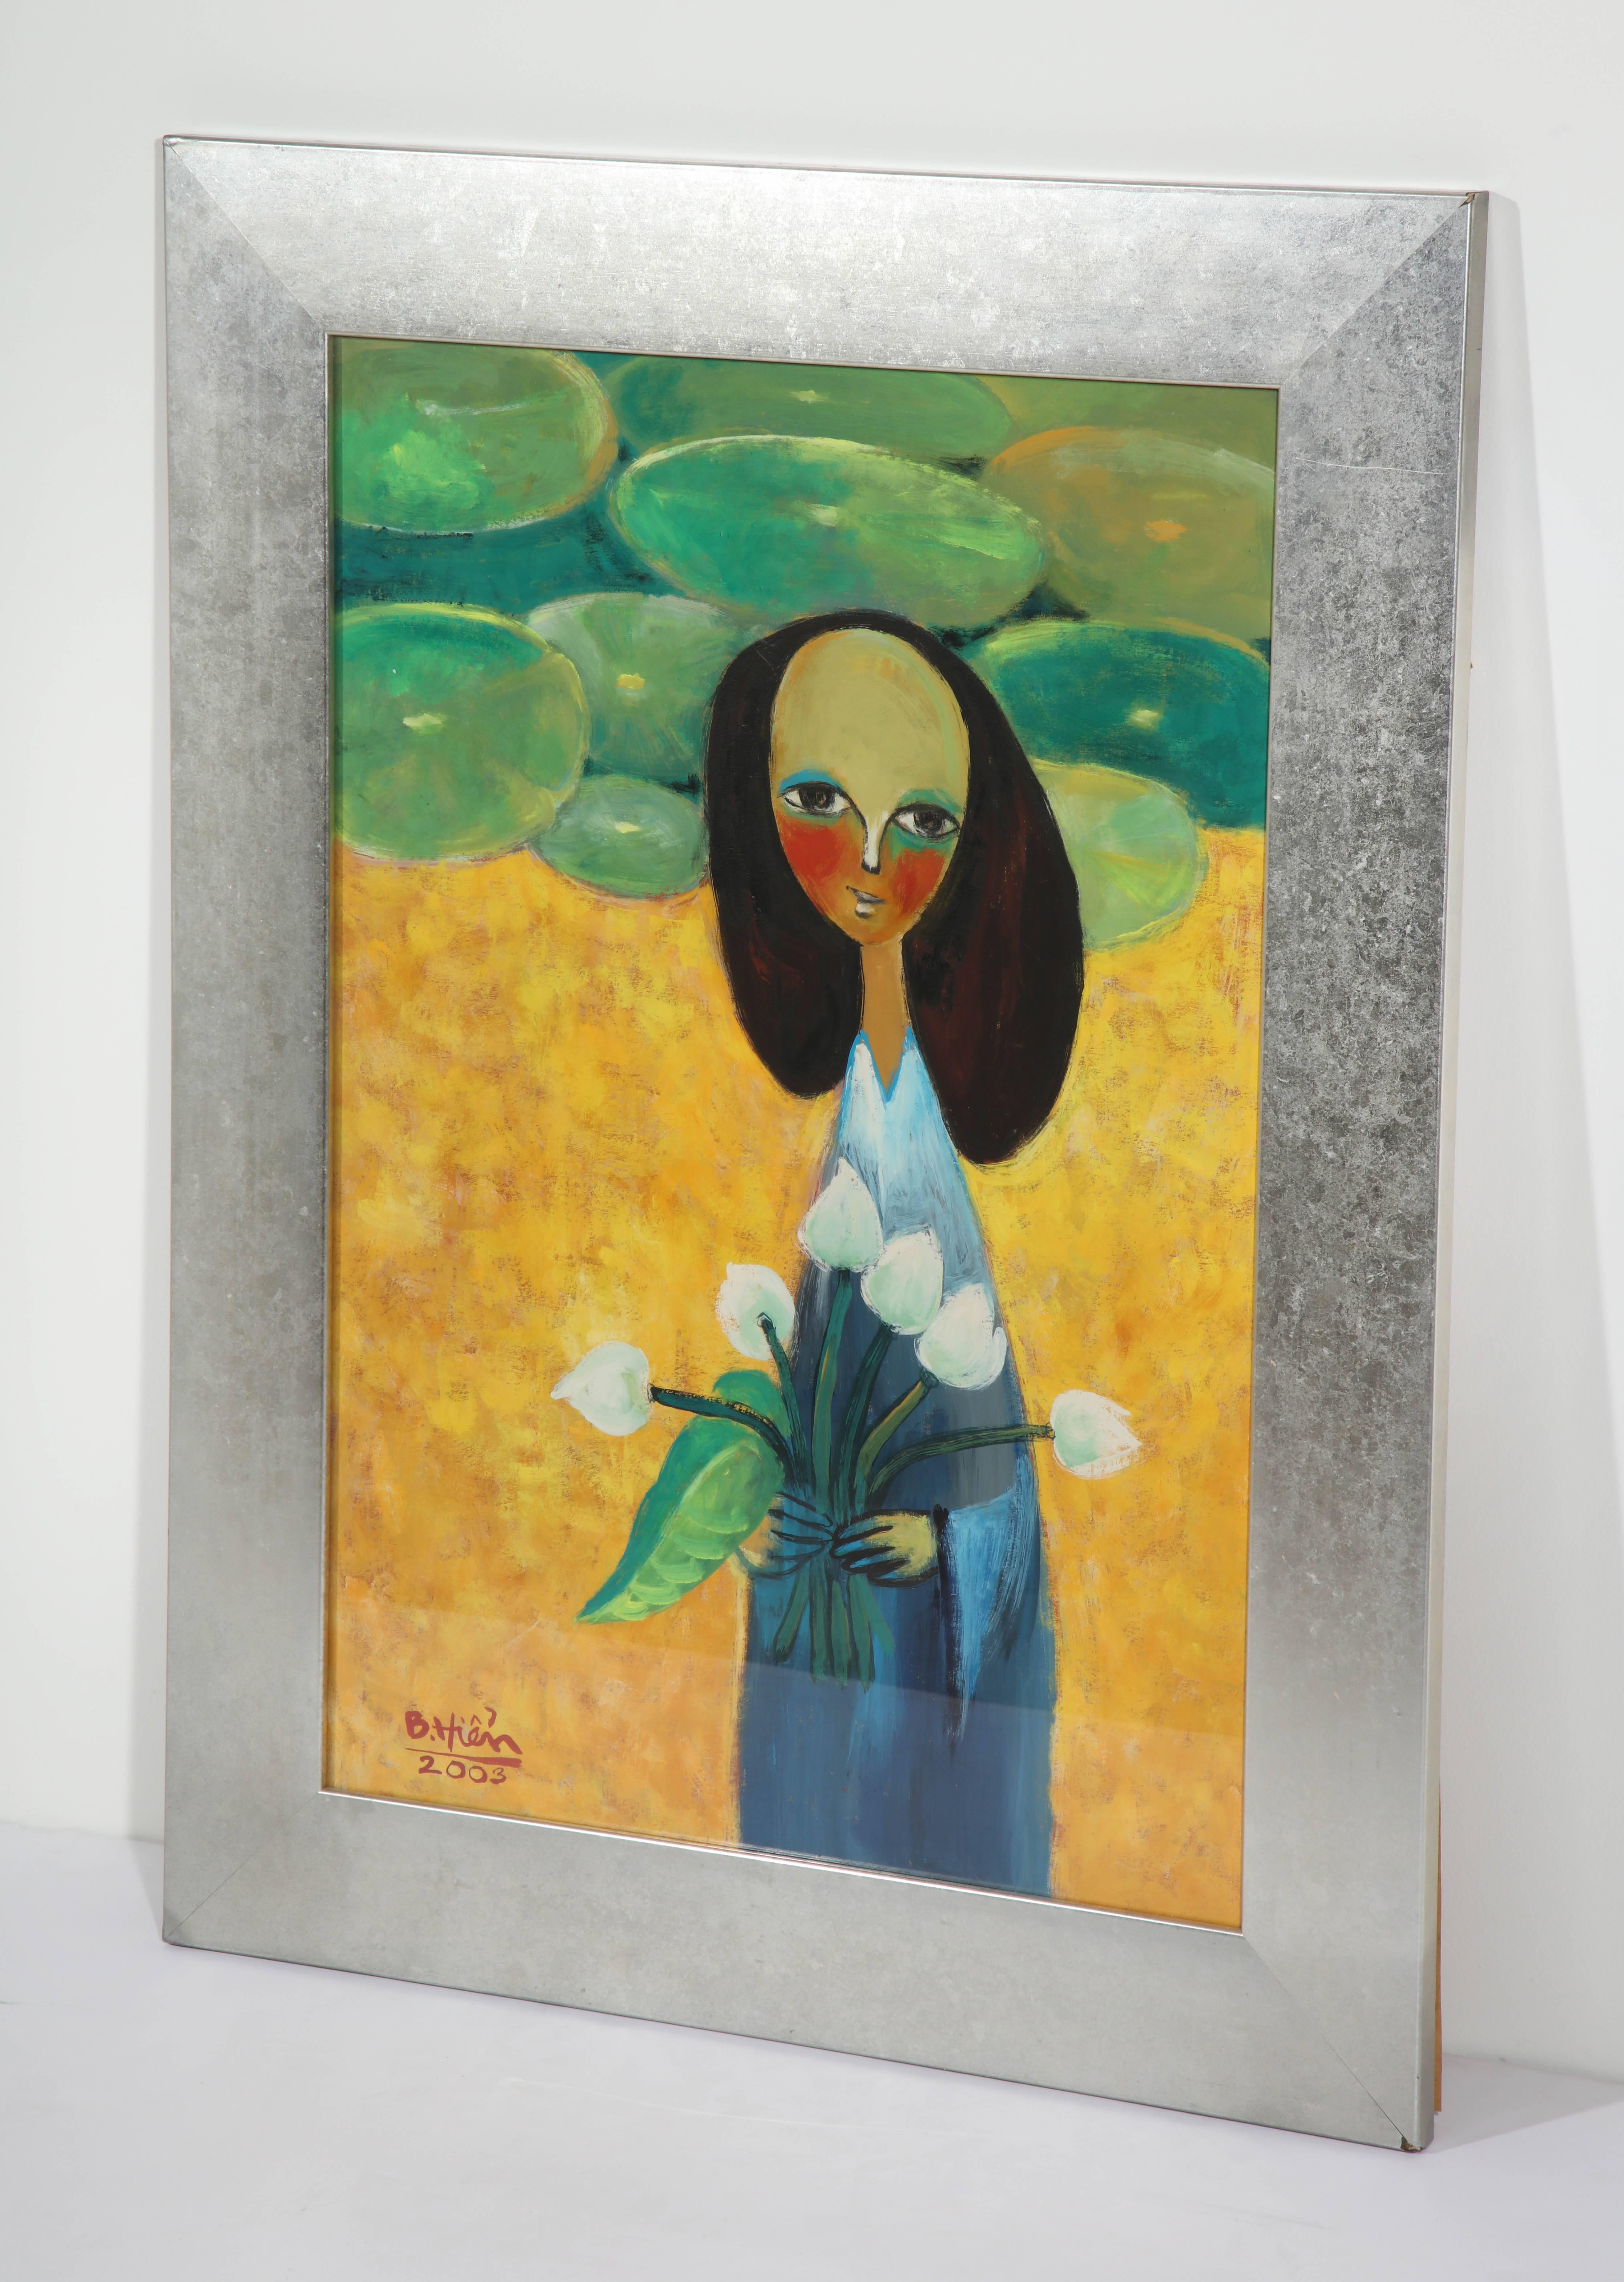 Hand-Painted Painting of a Lady with Flowers, Green, Yellow and Blue, On Paper, Hanoi Artist For Sale